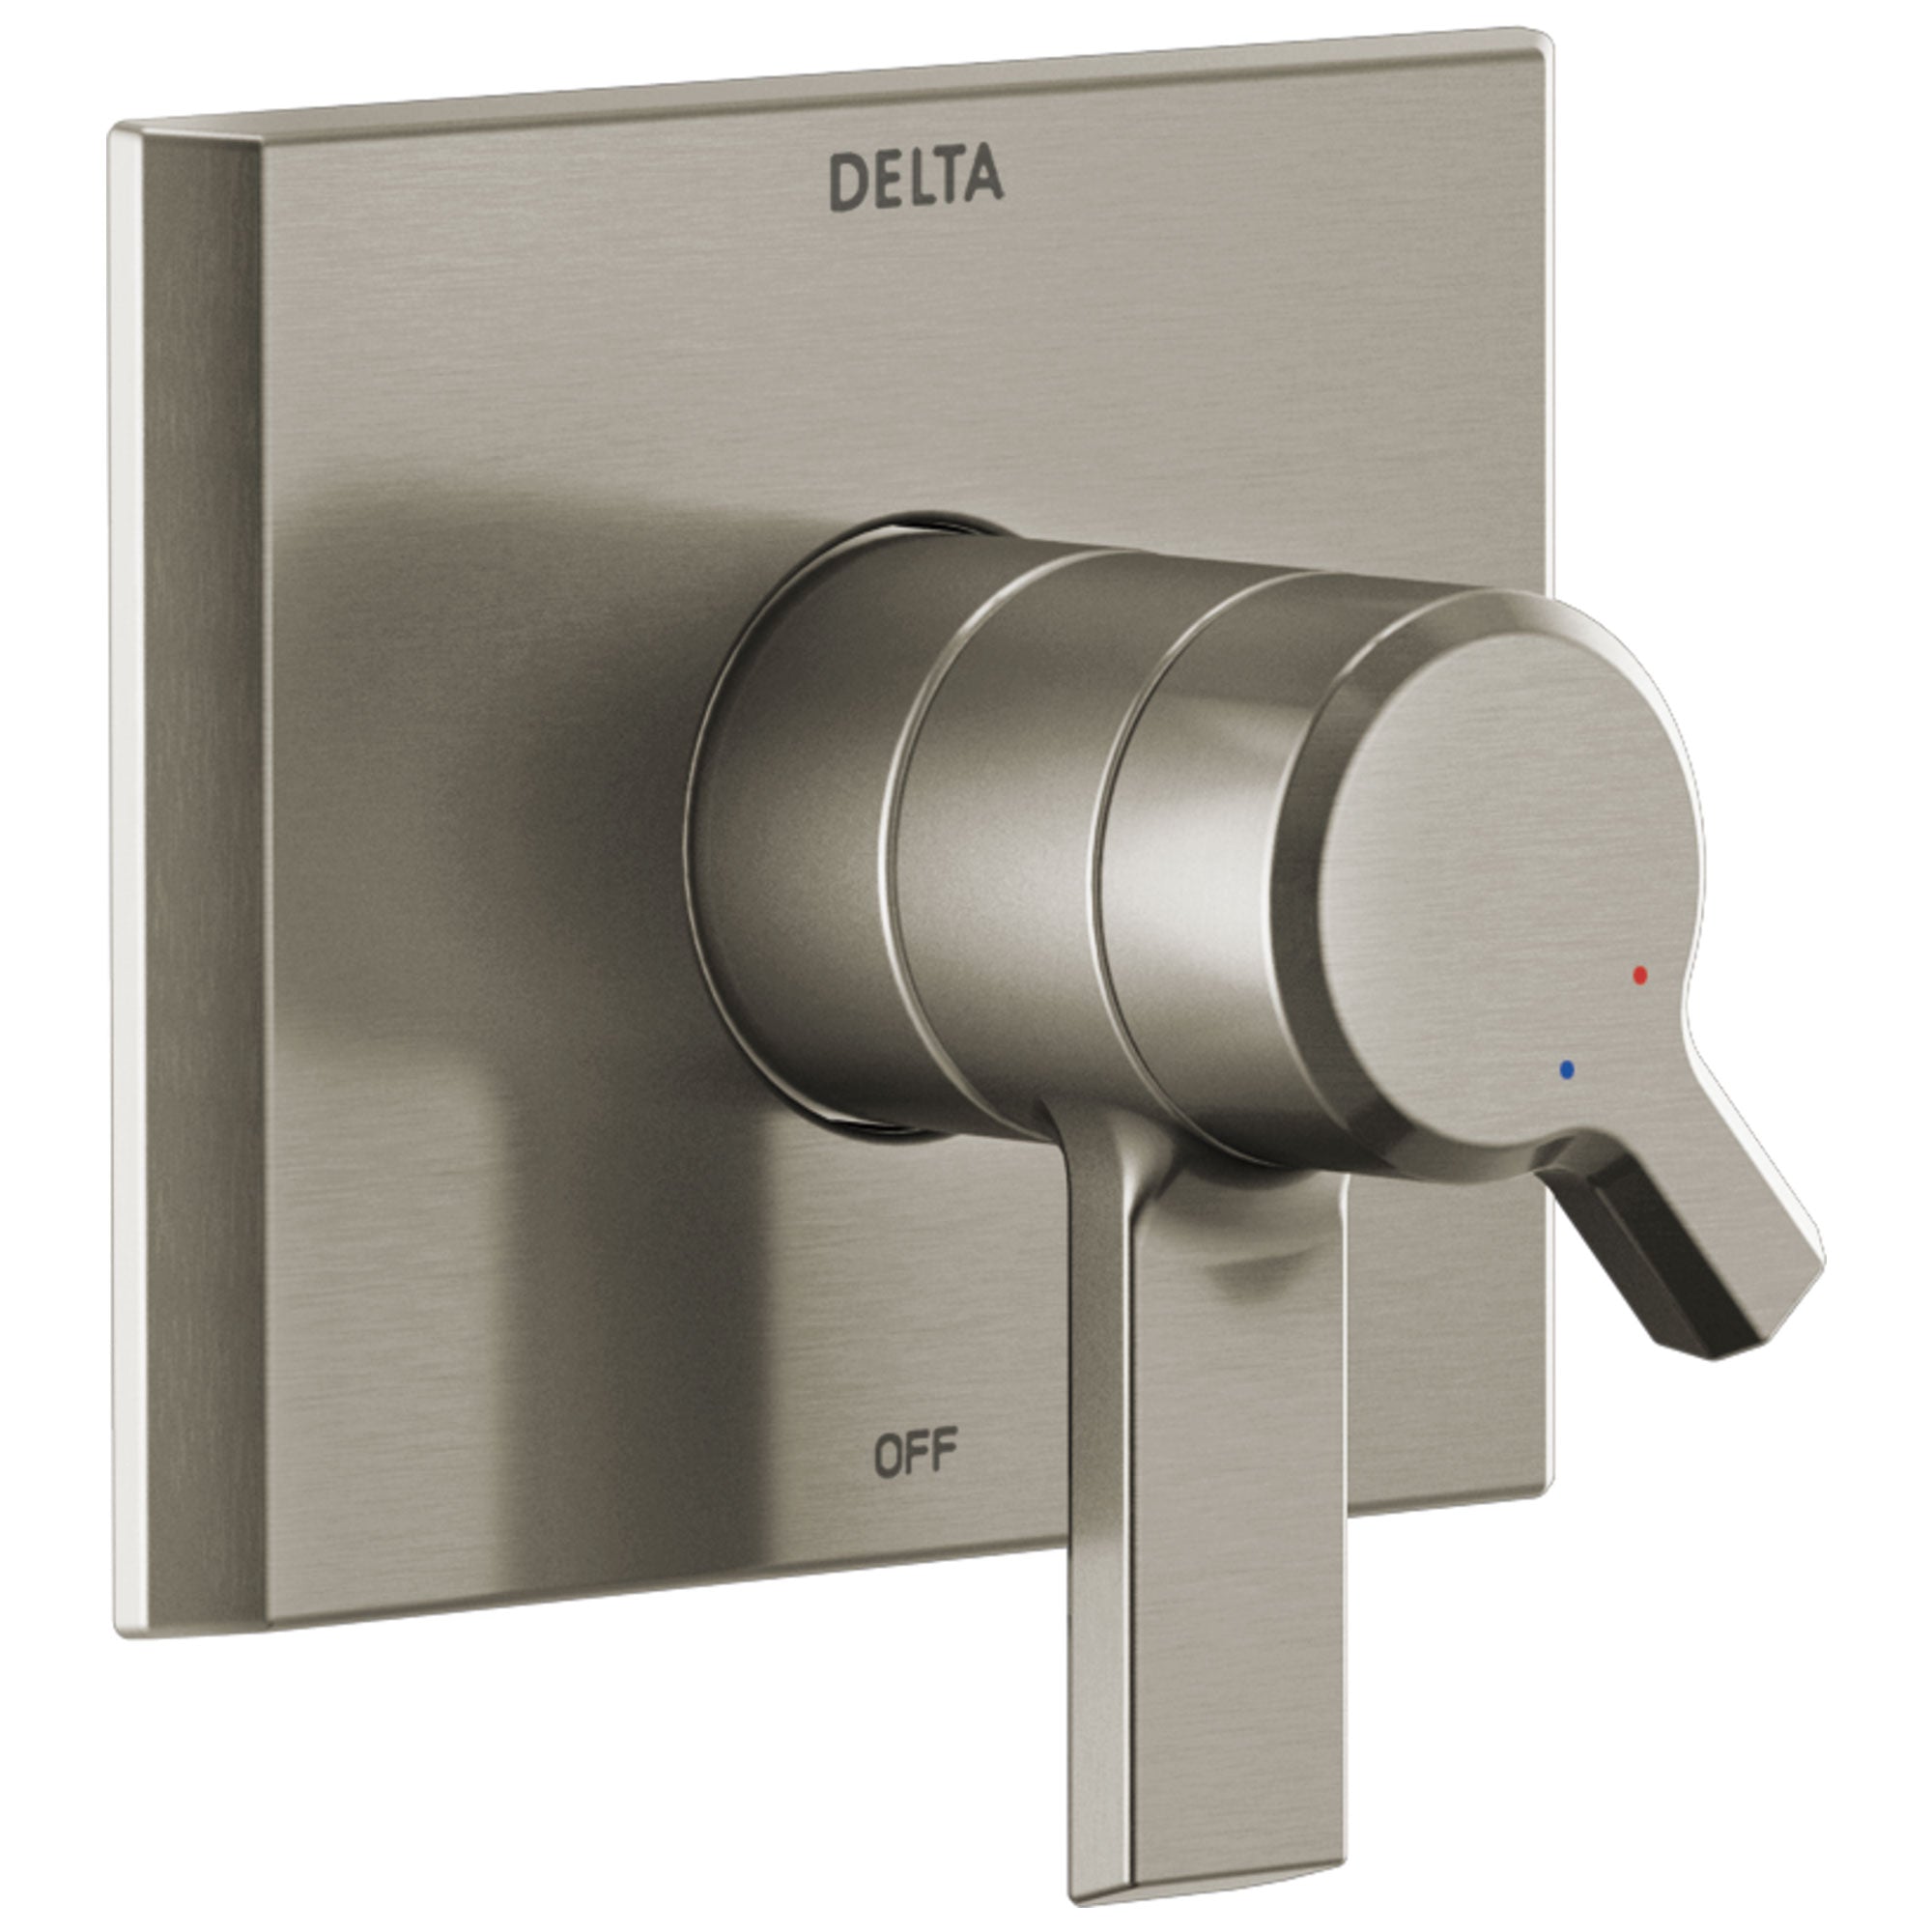 Delta Pivotal Stainless Steel Finish Monitor 17 Series Shower Faucet Control Only Trim Kit (Requires Valve) DT17099SS